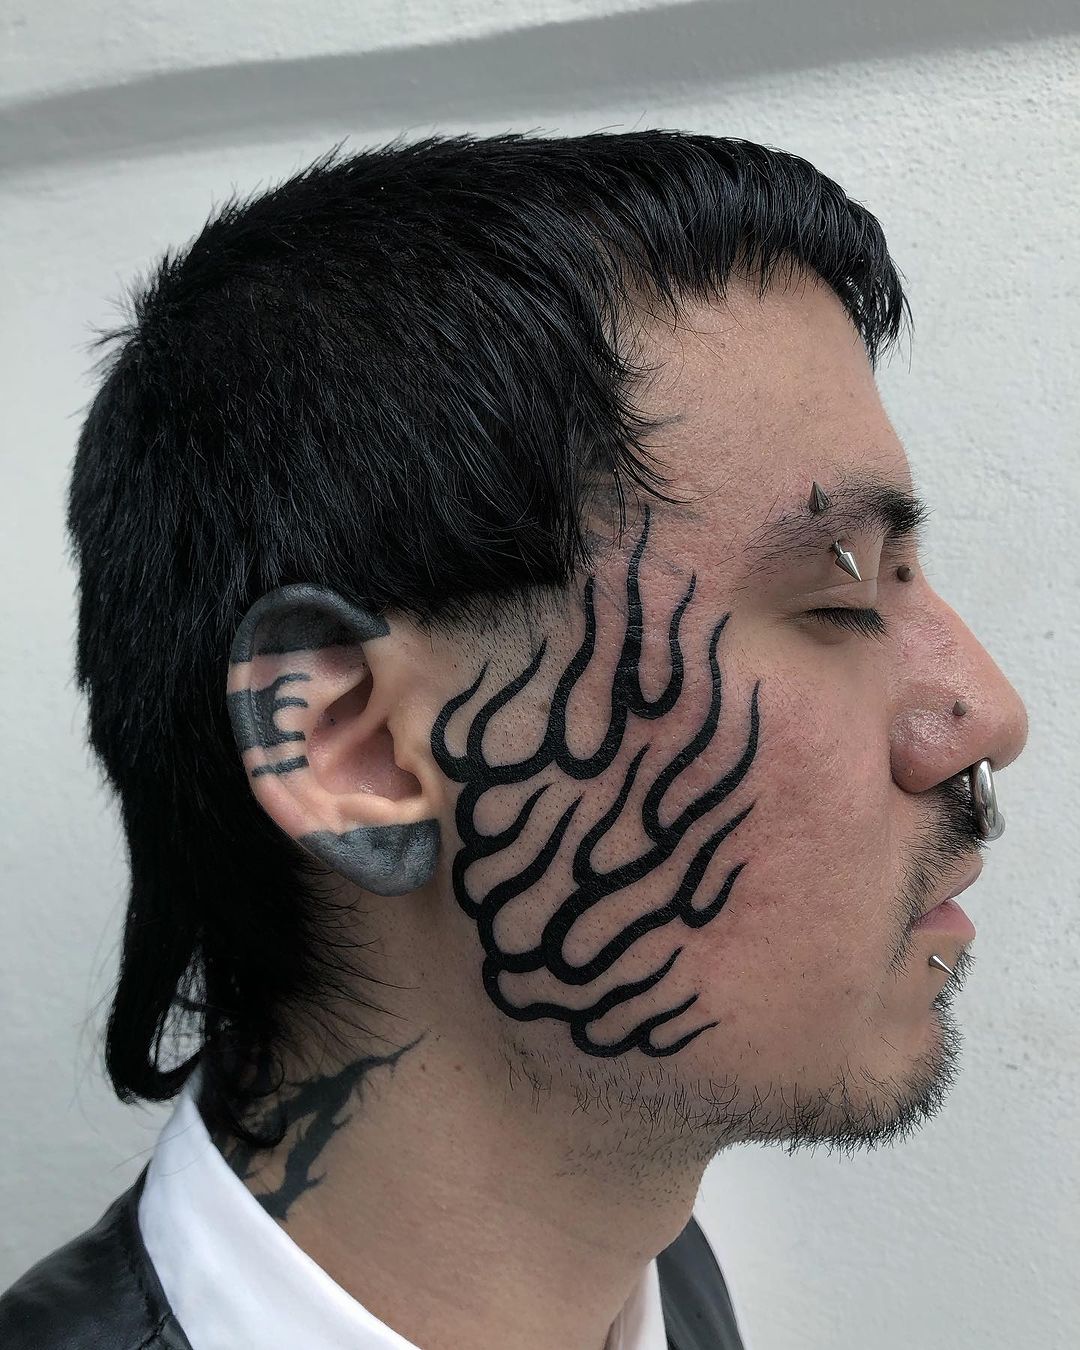 Amazing face tattoo by entelequiagrafica